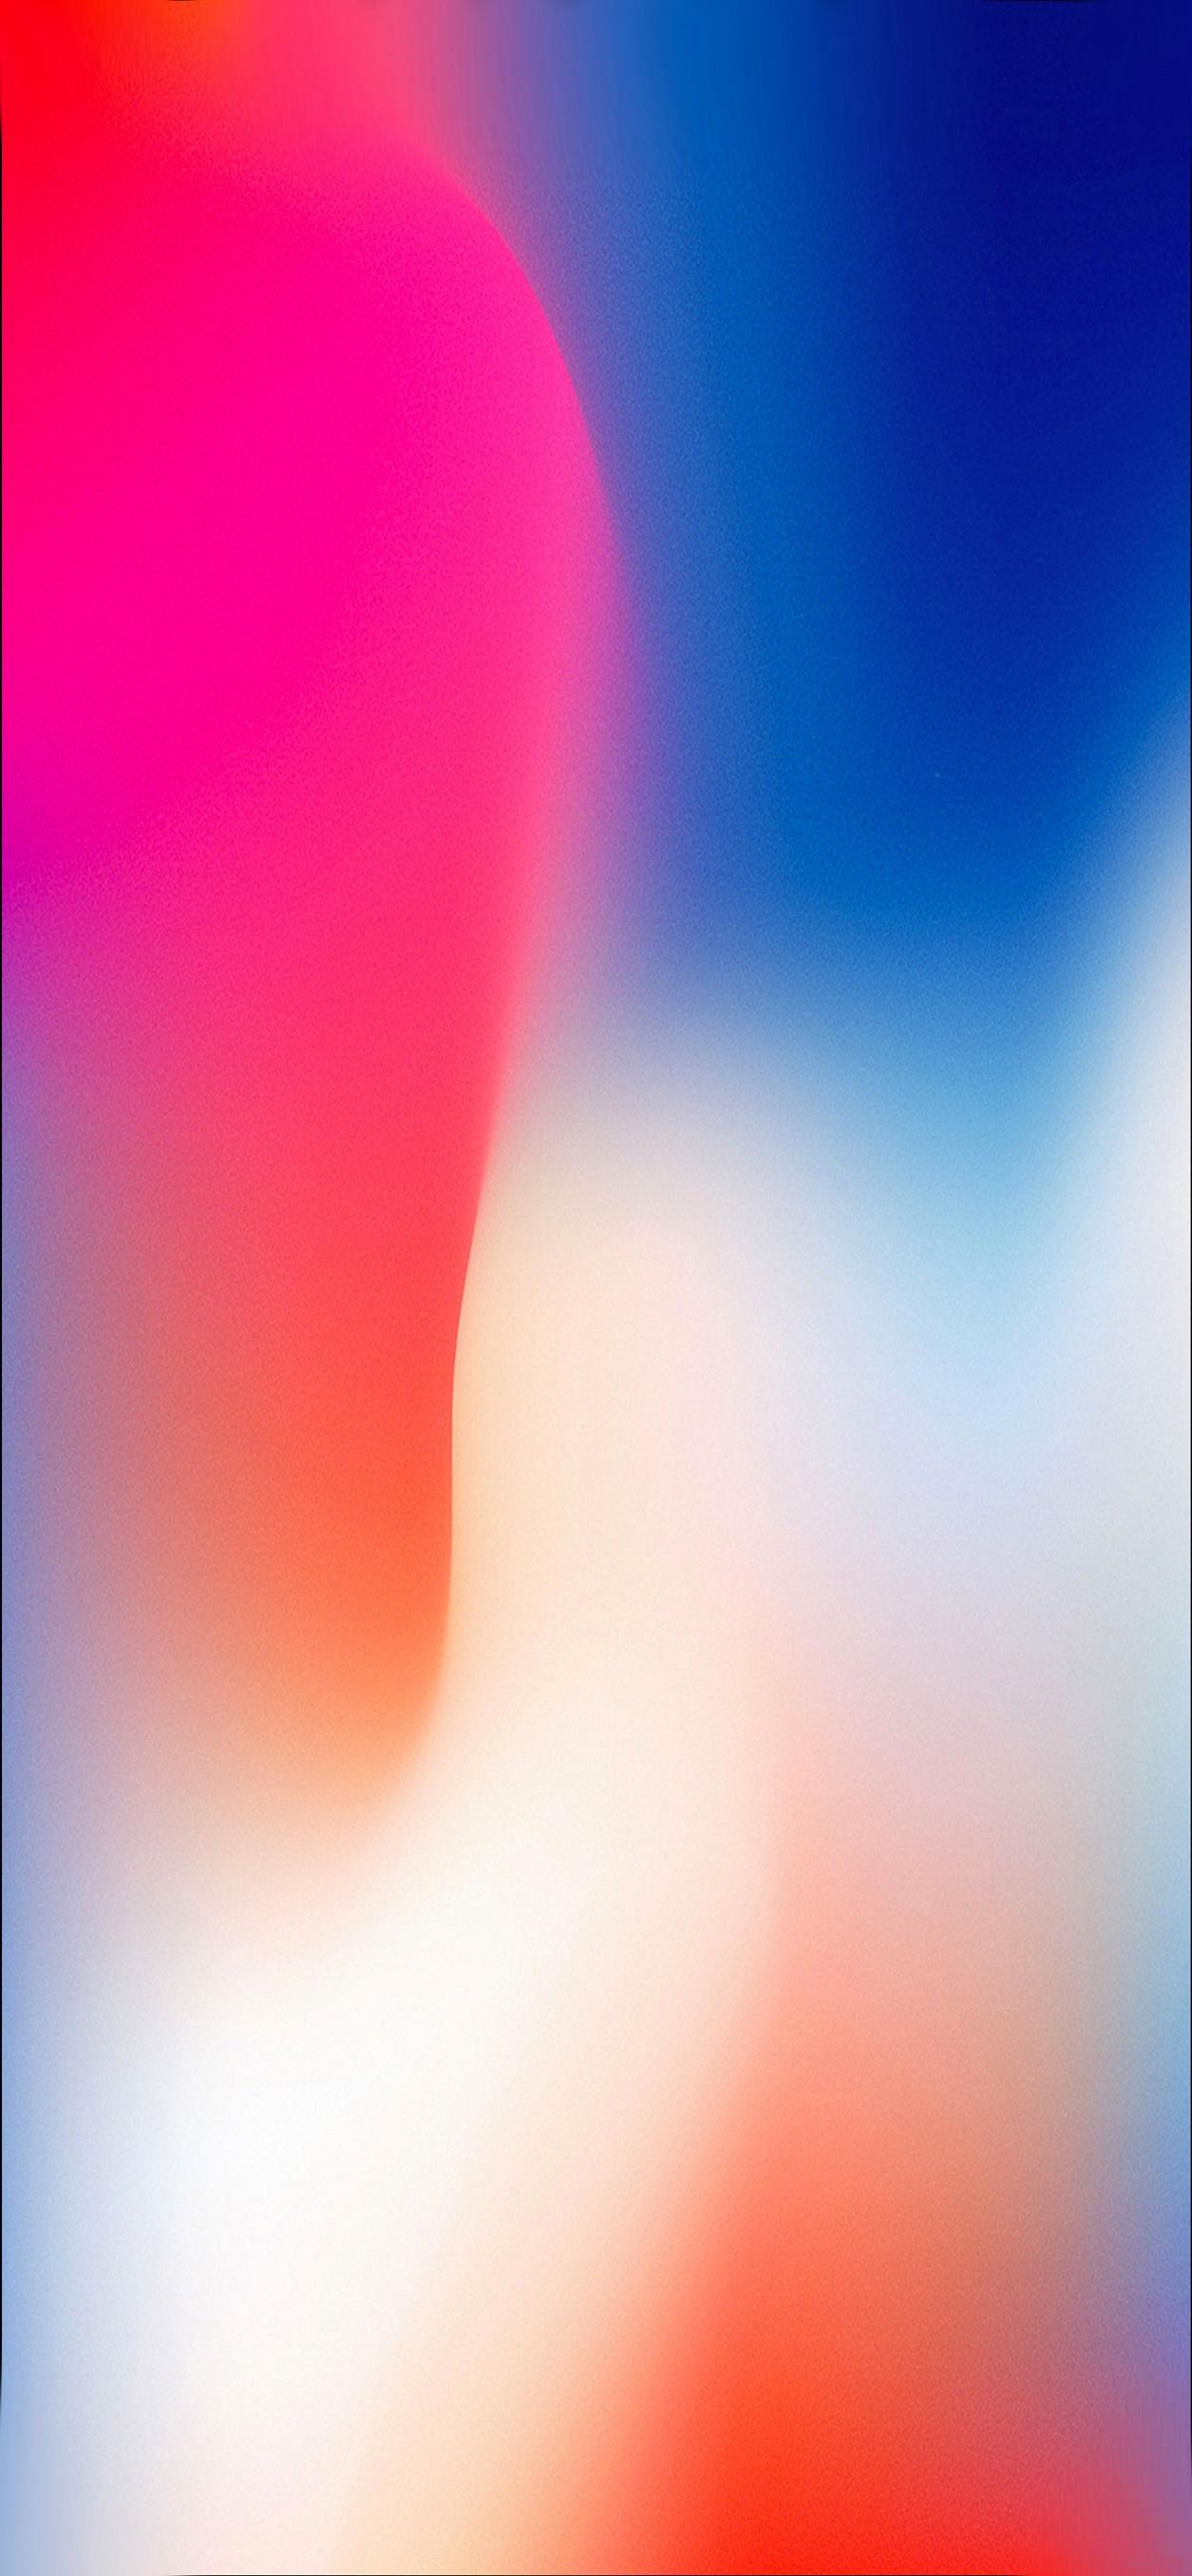 IOS 8 Stock Wallpapers